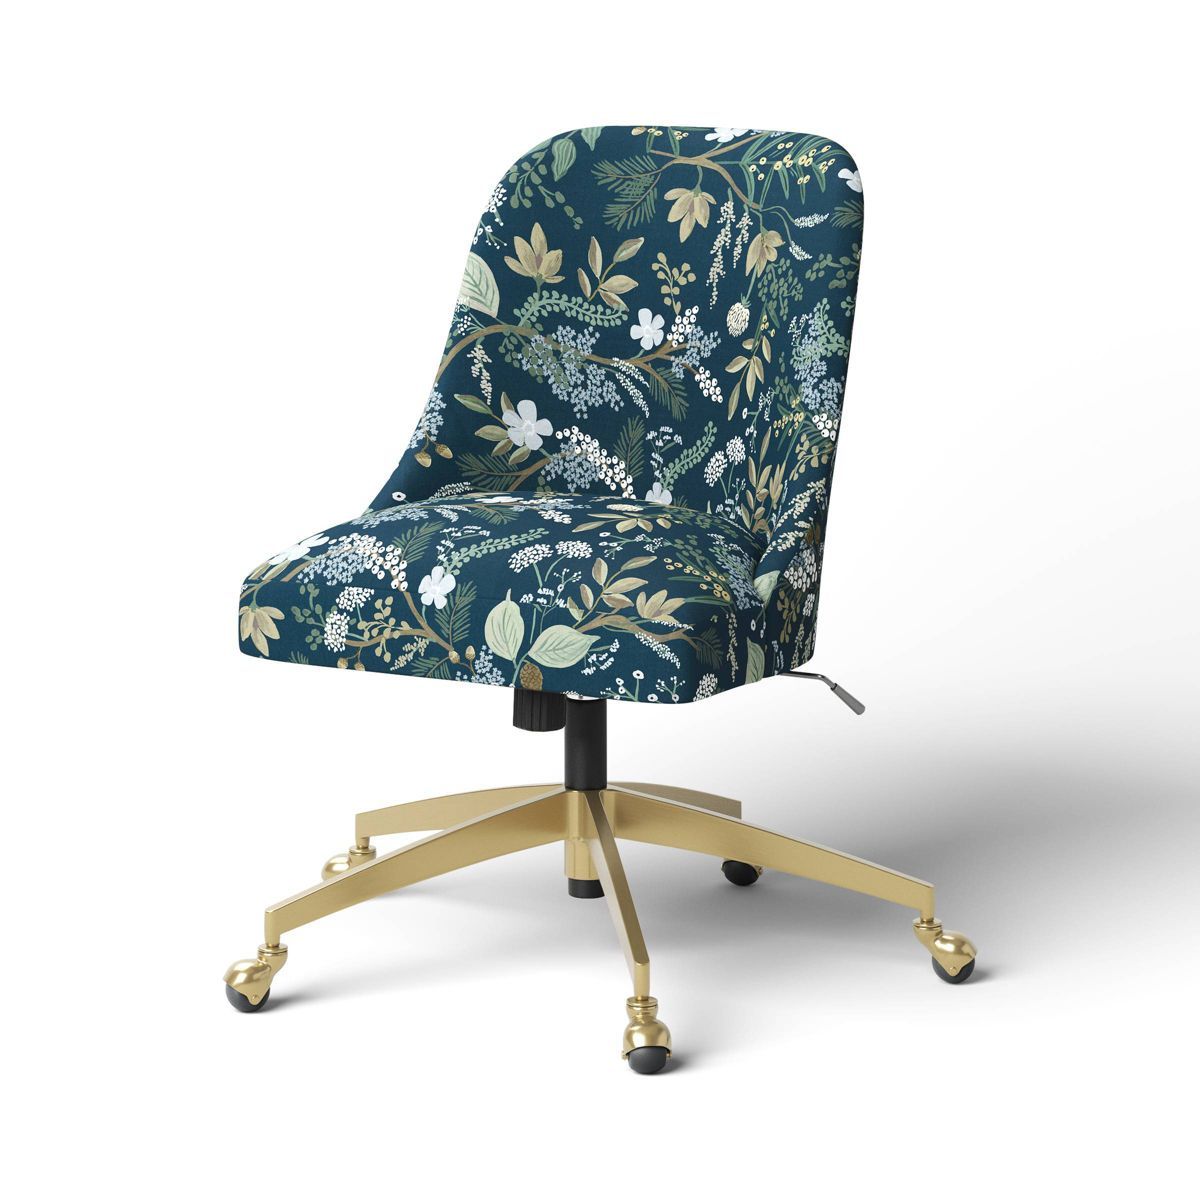 Rifle Paper Co. x Target Desk Chair | Target